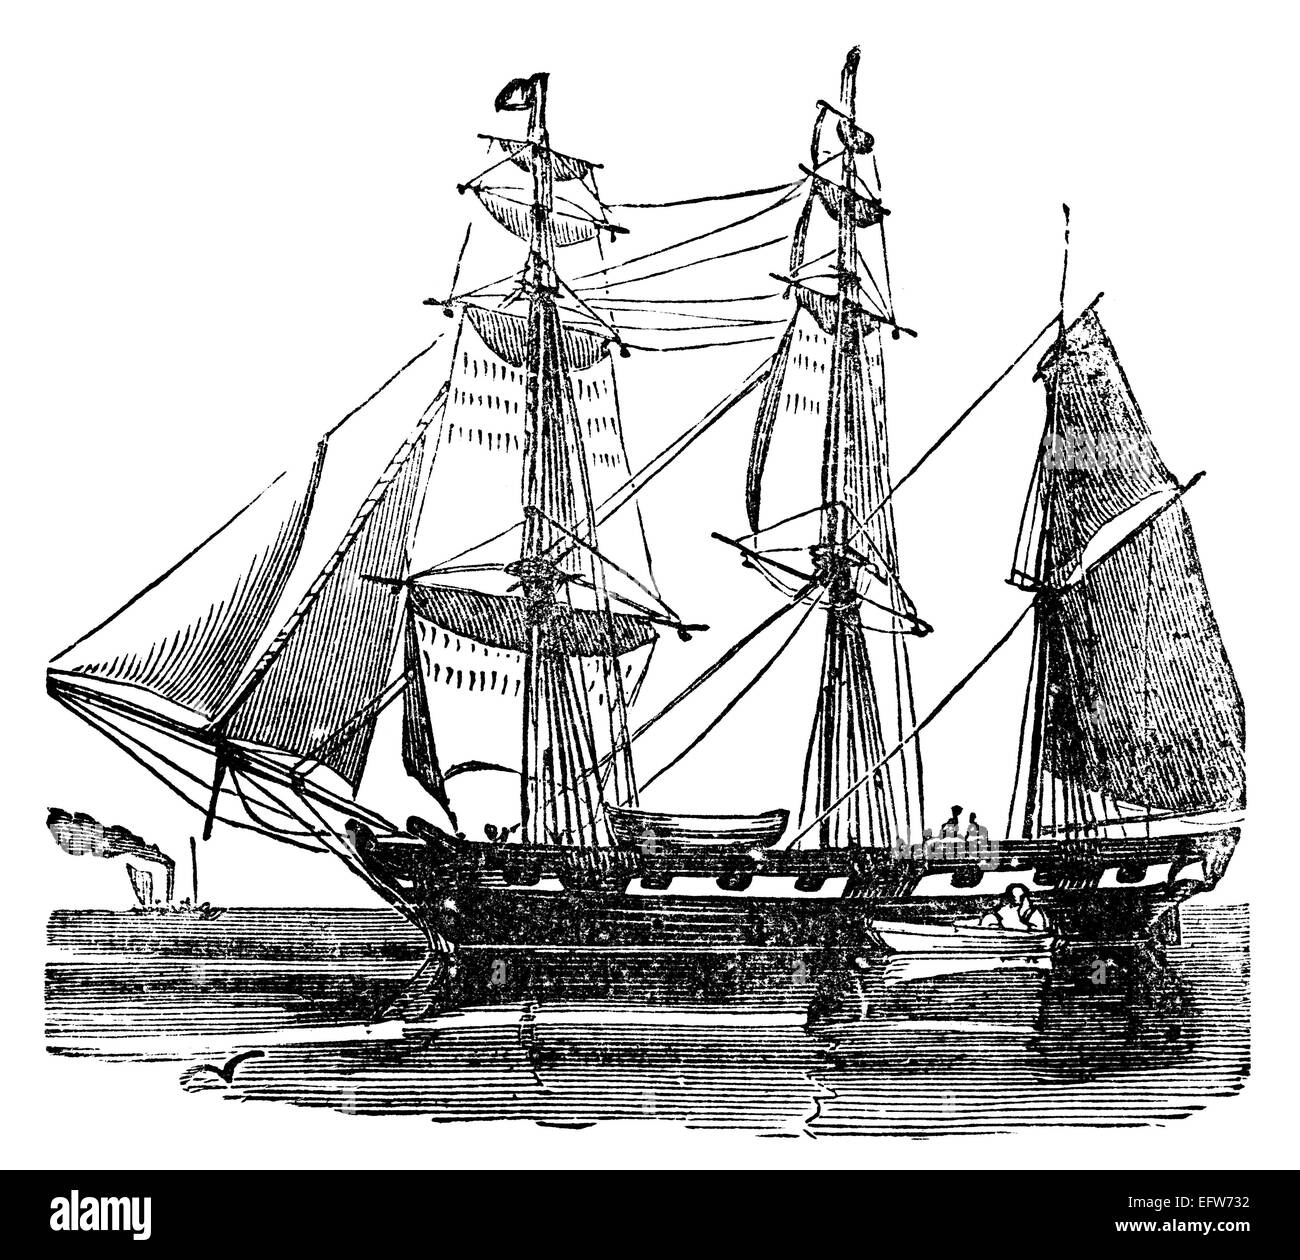 Victorian engraving of a sailing barque. Digitally restored image from a mid-19th century Encyclopaedia. Stock Photo